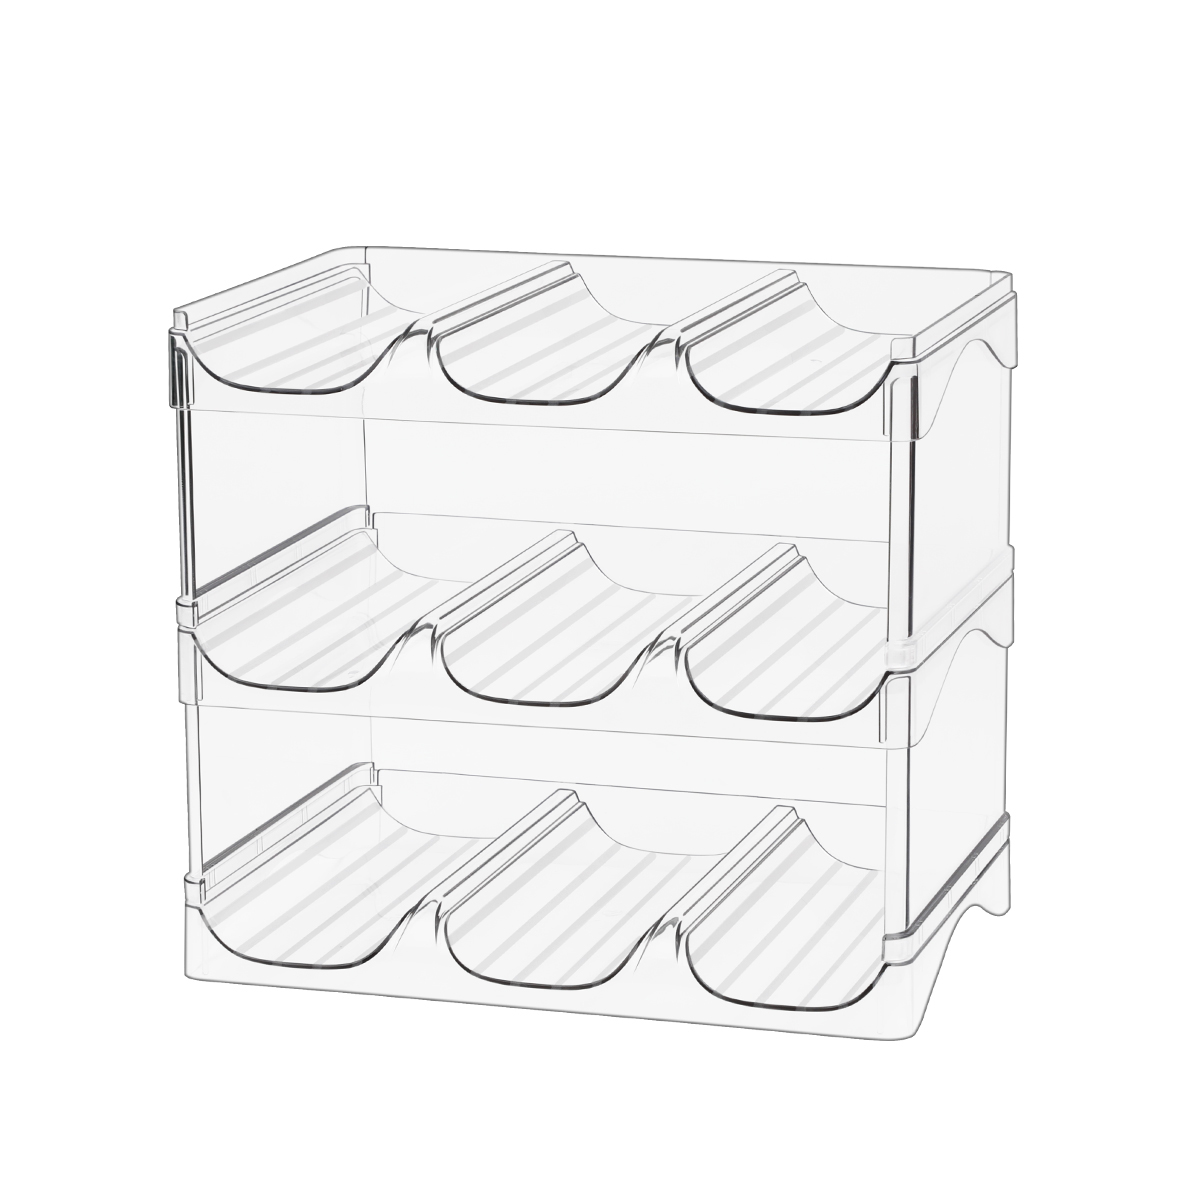 Water Bottle Organizer For Cabinet 4 Pack Plastic Clear Stackable Bottle Holder Storage For Pantry Organizer